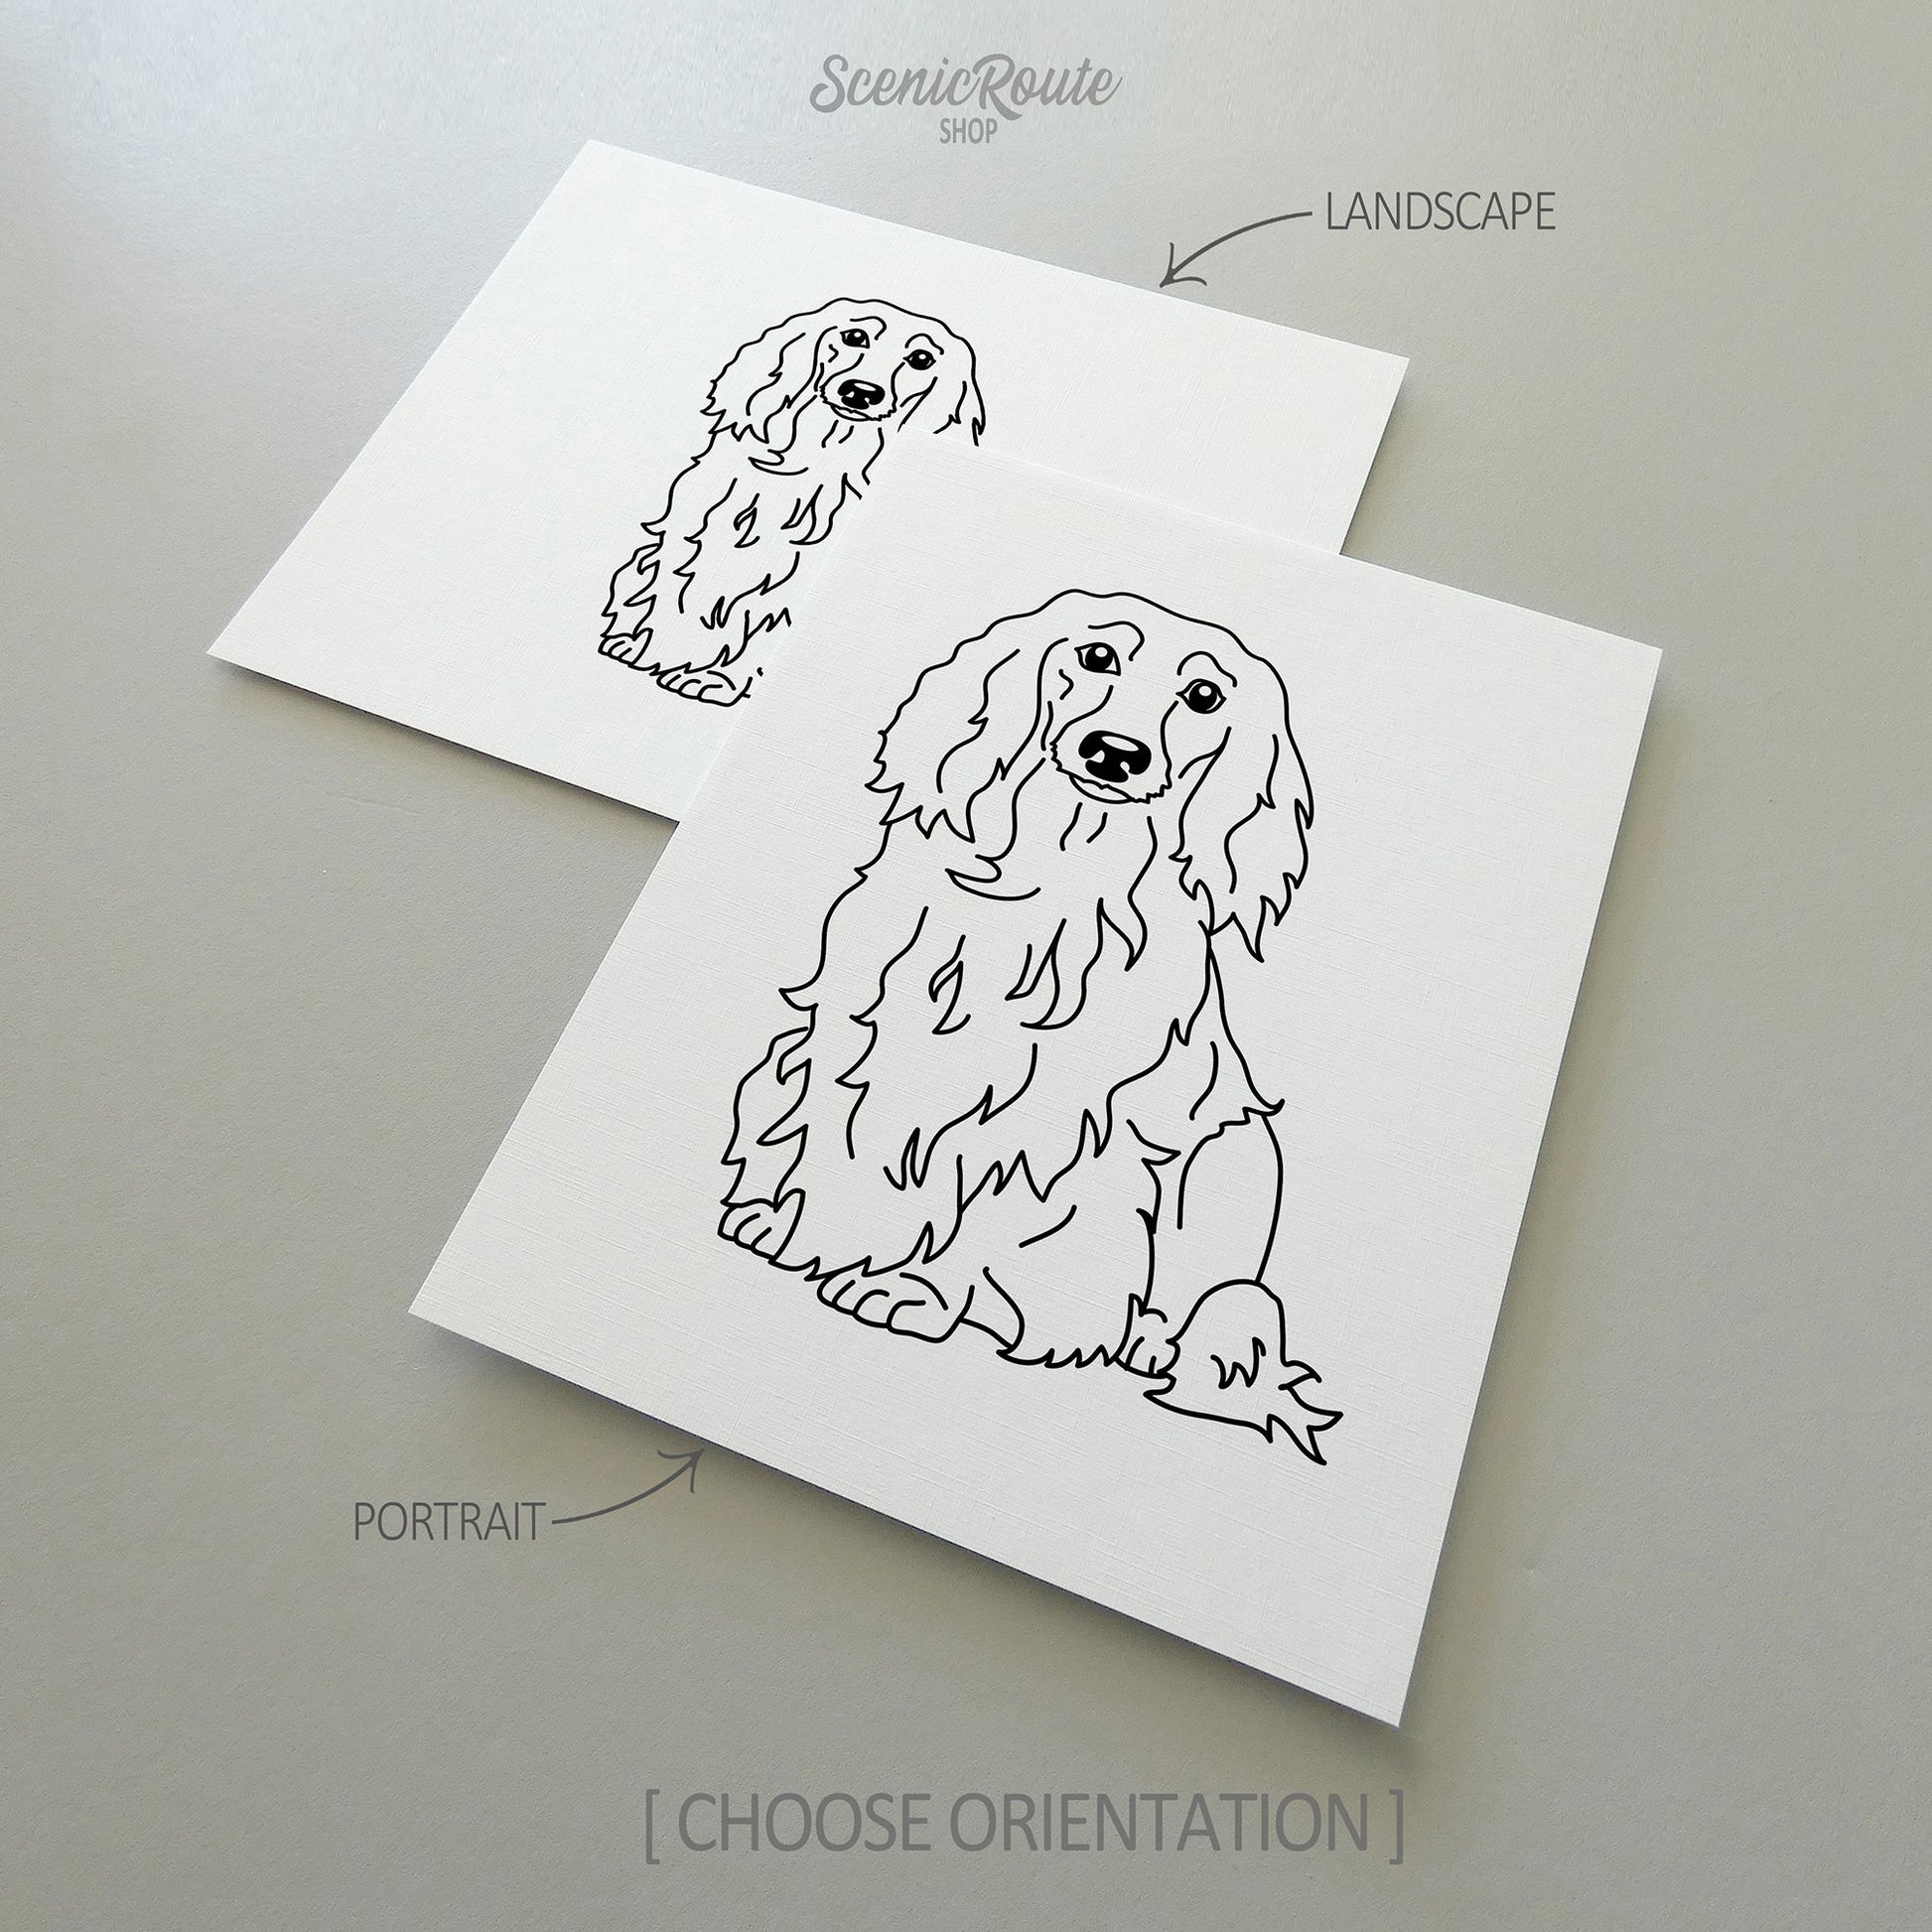 Two drawings of a Long Haired Dachshund dog on white linen paper with a gray background.  Pieces are shown in portrait and landscape orientation options to illustrate the available art print options.